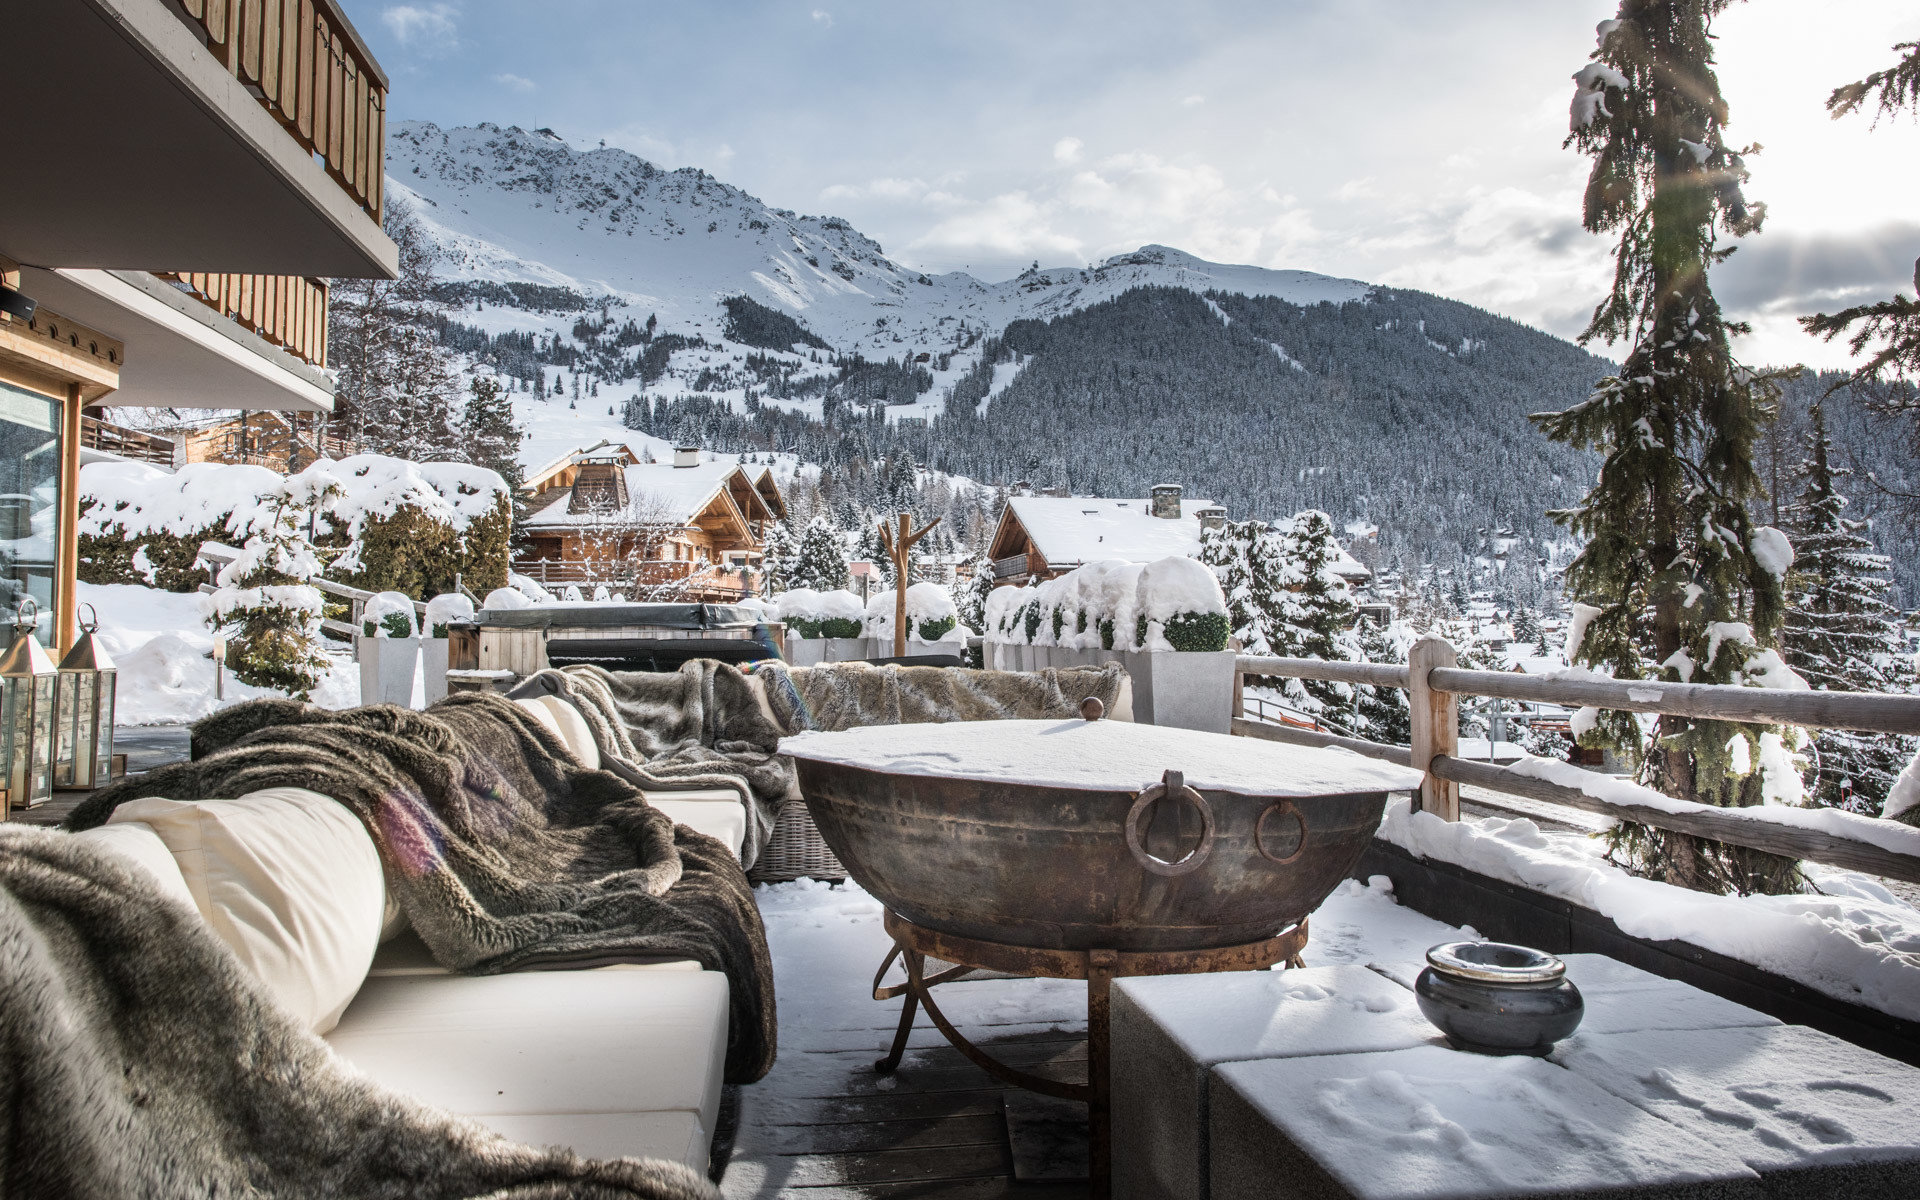 The Best Luxury Ski Resorts to Stay In This Winter